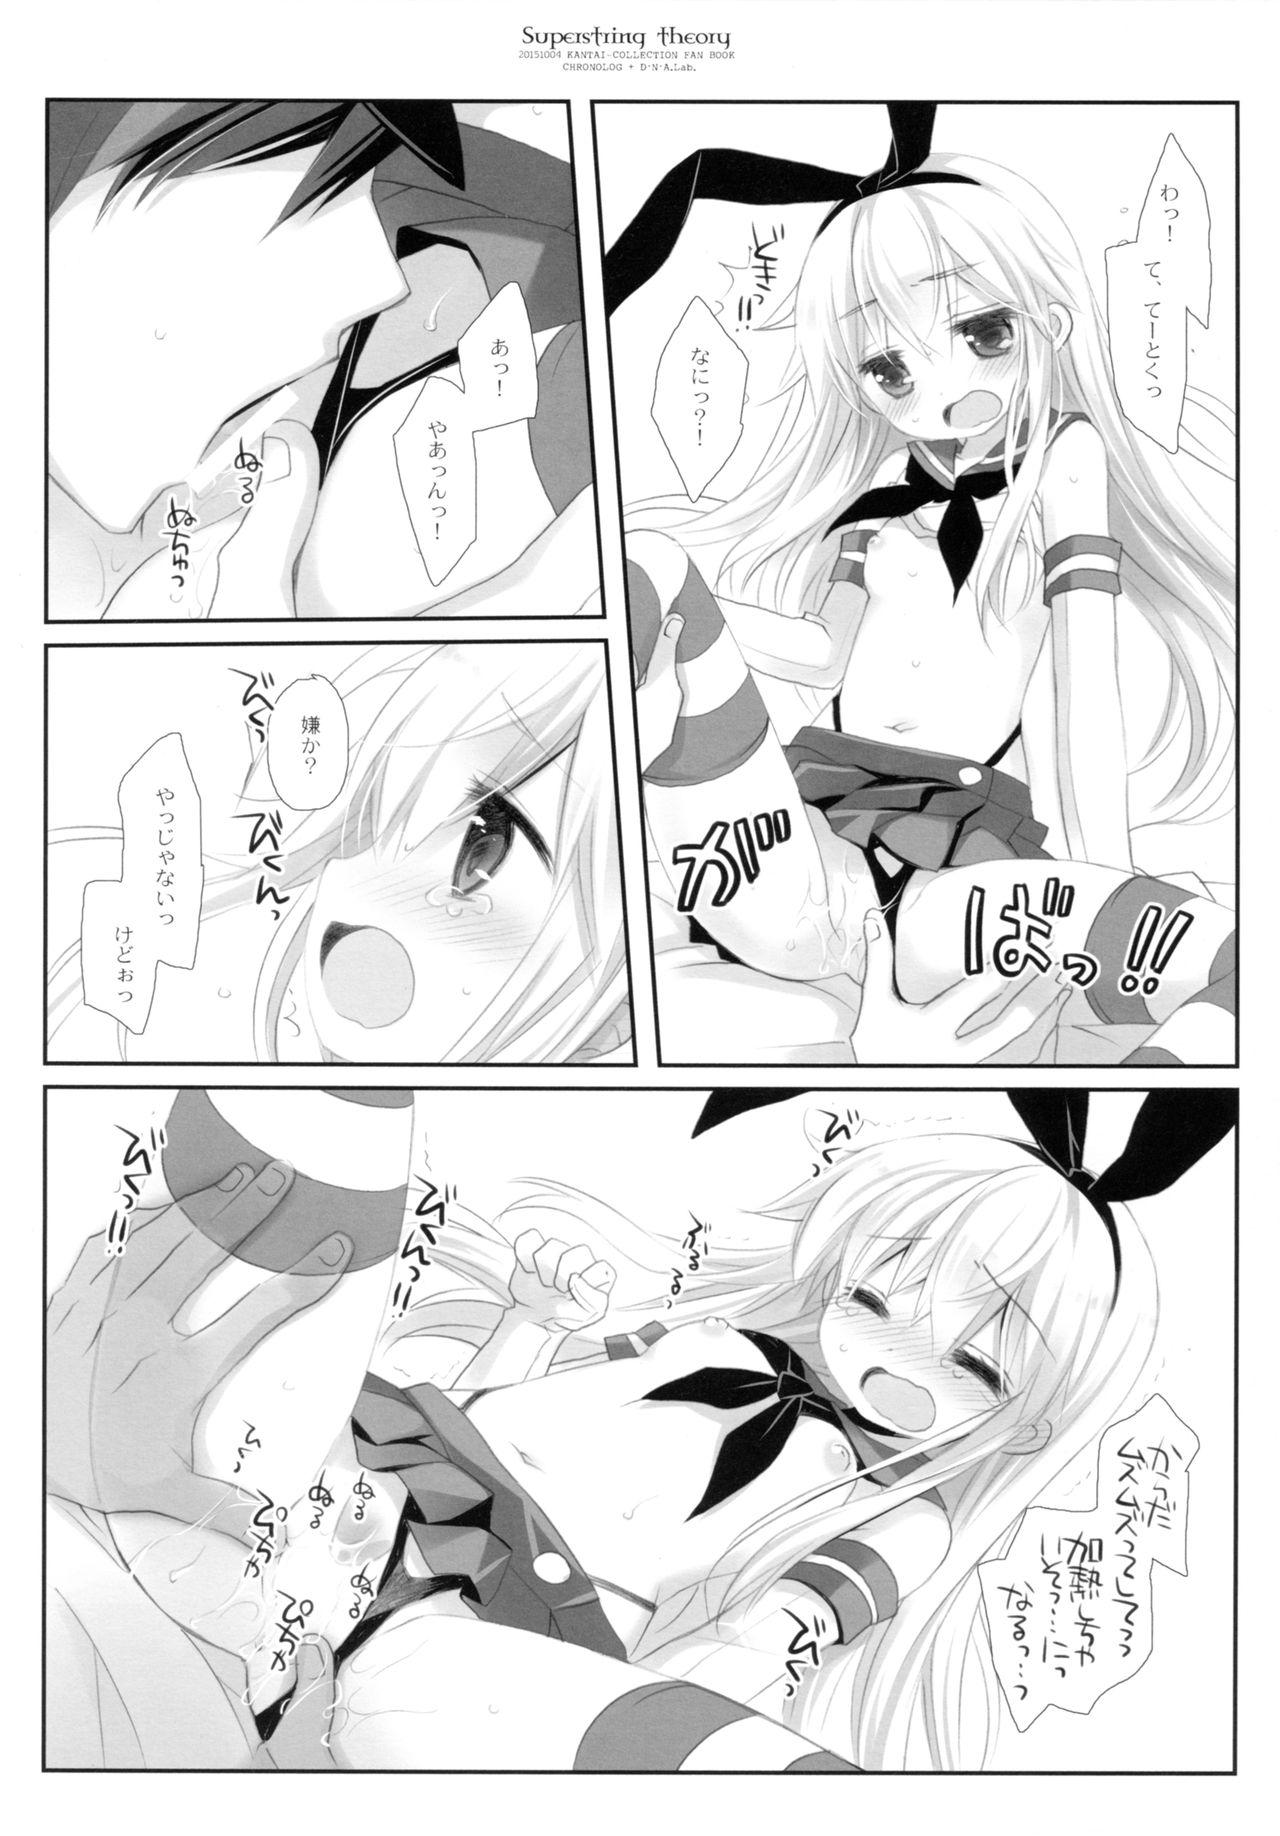 Fuck Super String Theory - Kantai collection Moaning - Page 7